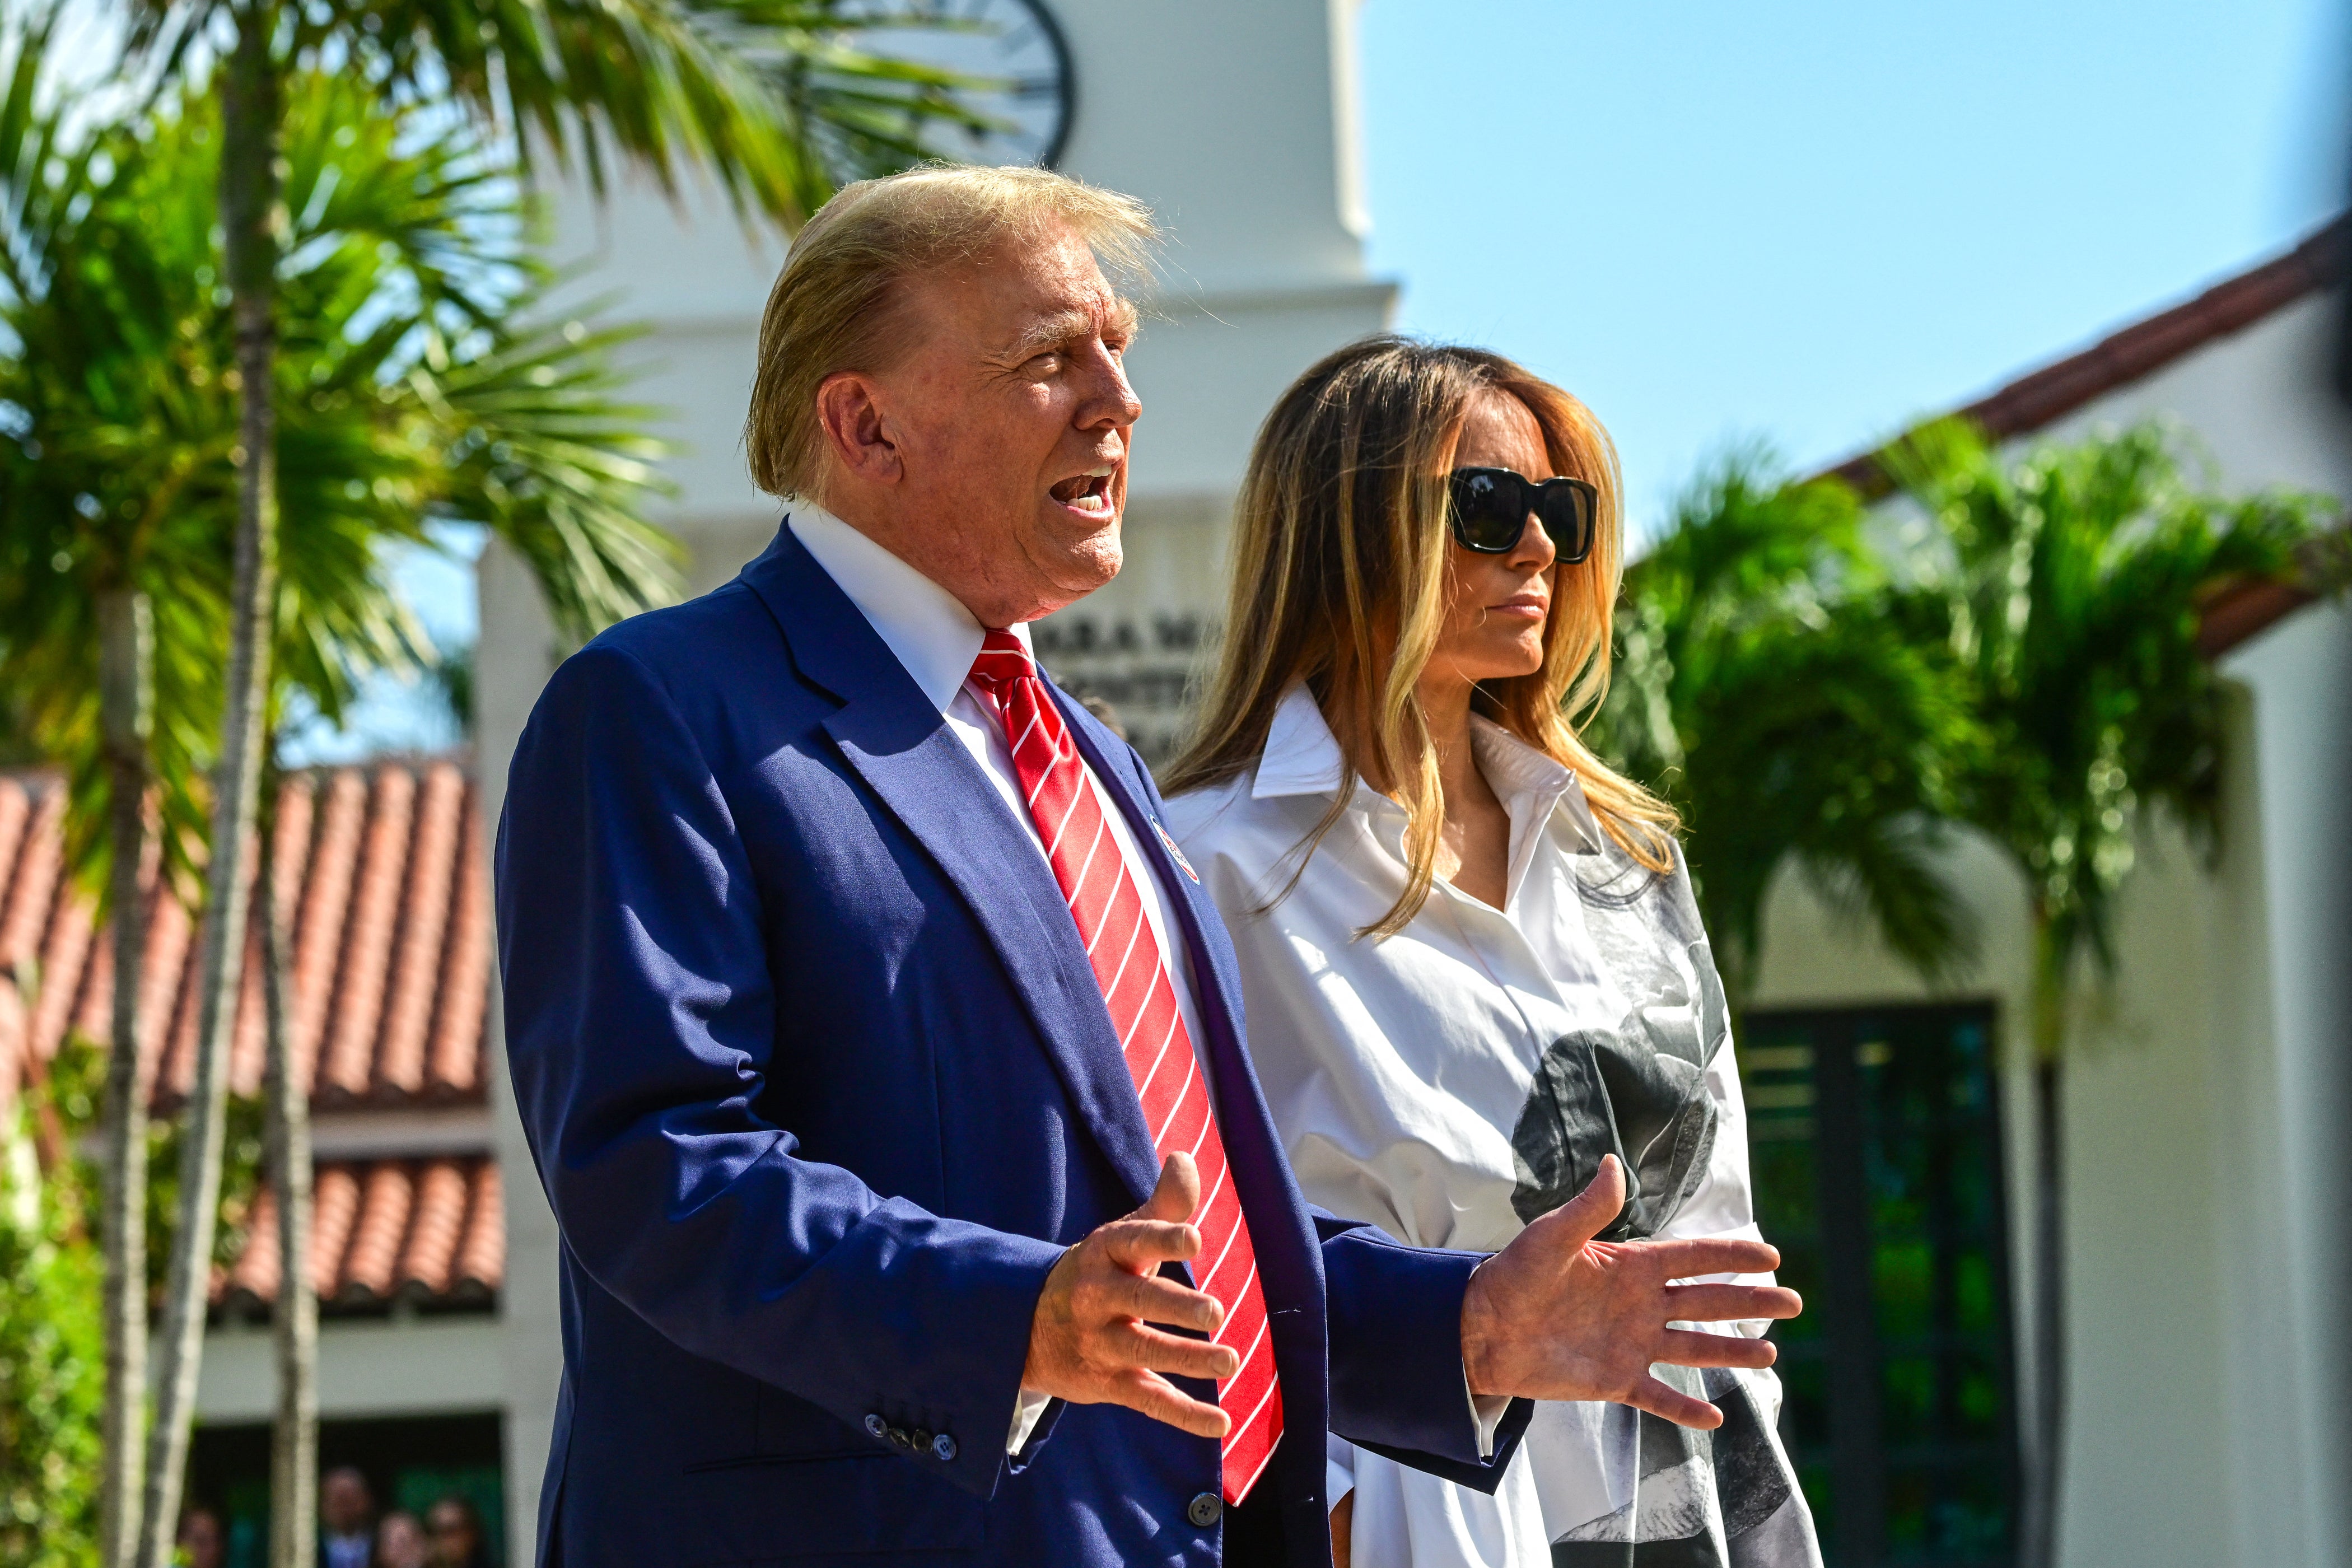 Donald and Melania Trump on a rare joint outing in Florida last month